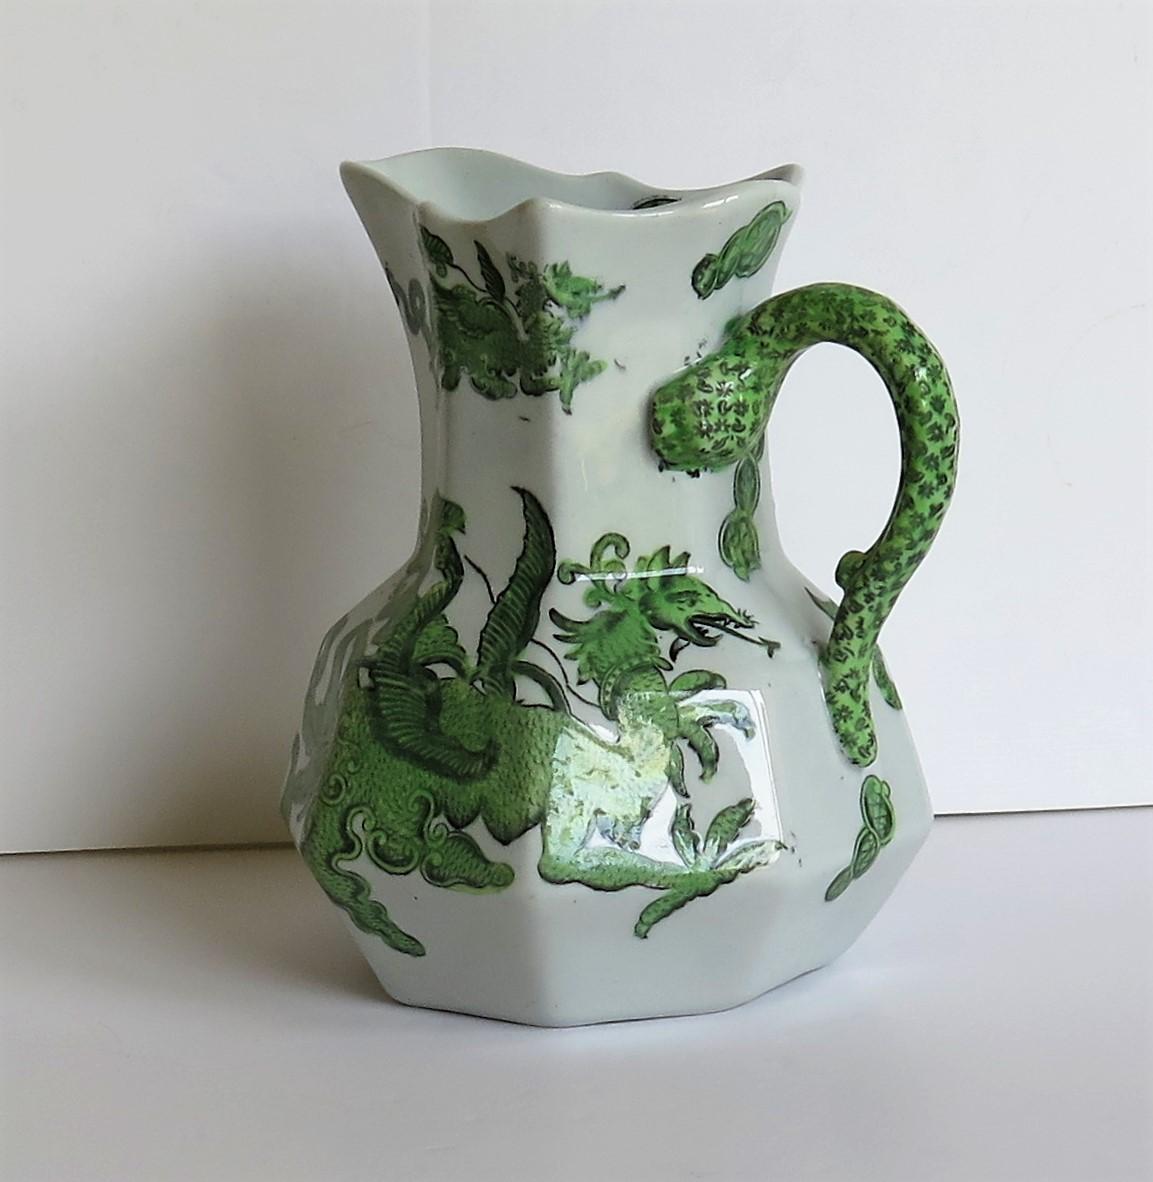 Chinoiserie Mason's Ironstone Jug or Pitcher in Green Chinese Dragon Pattern, 19th Century